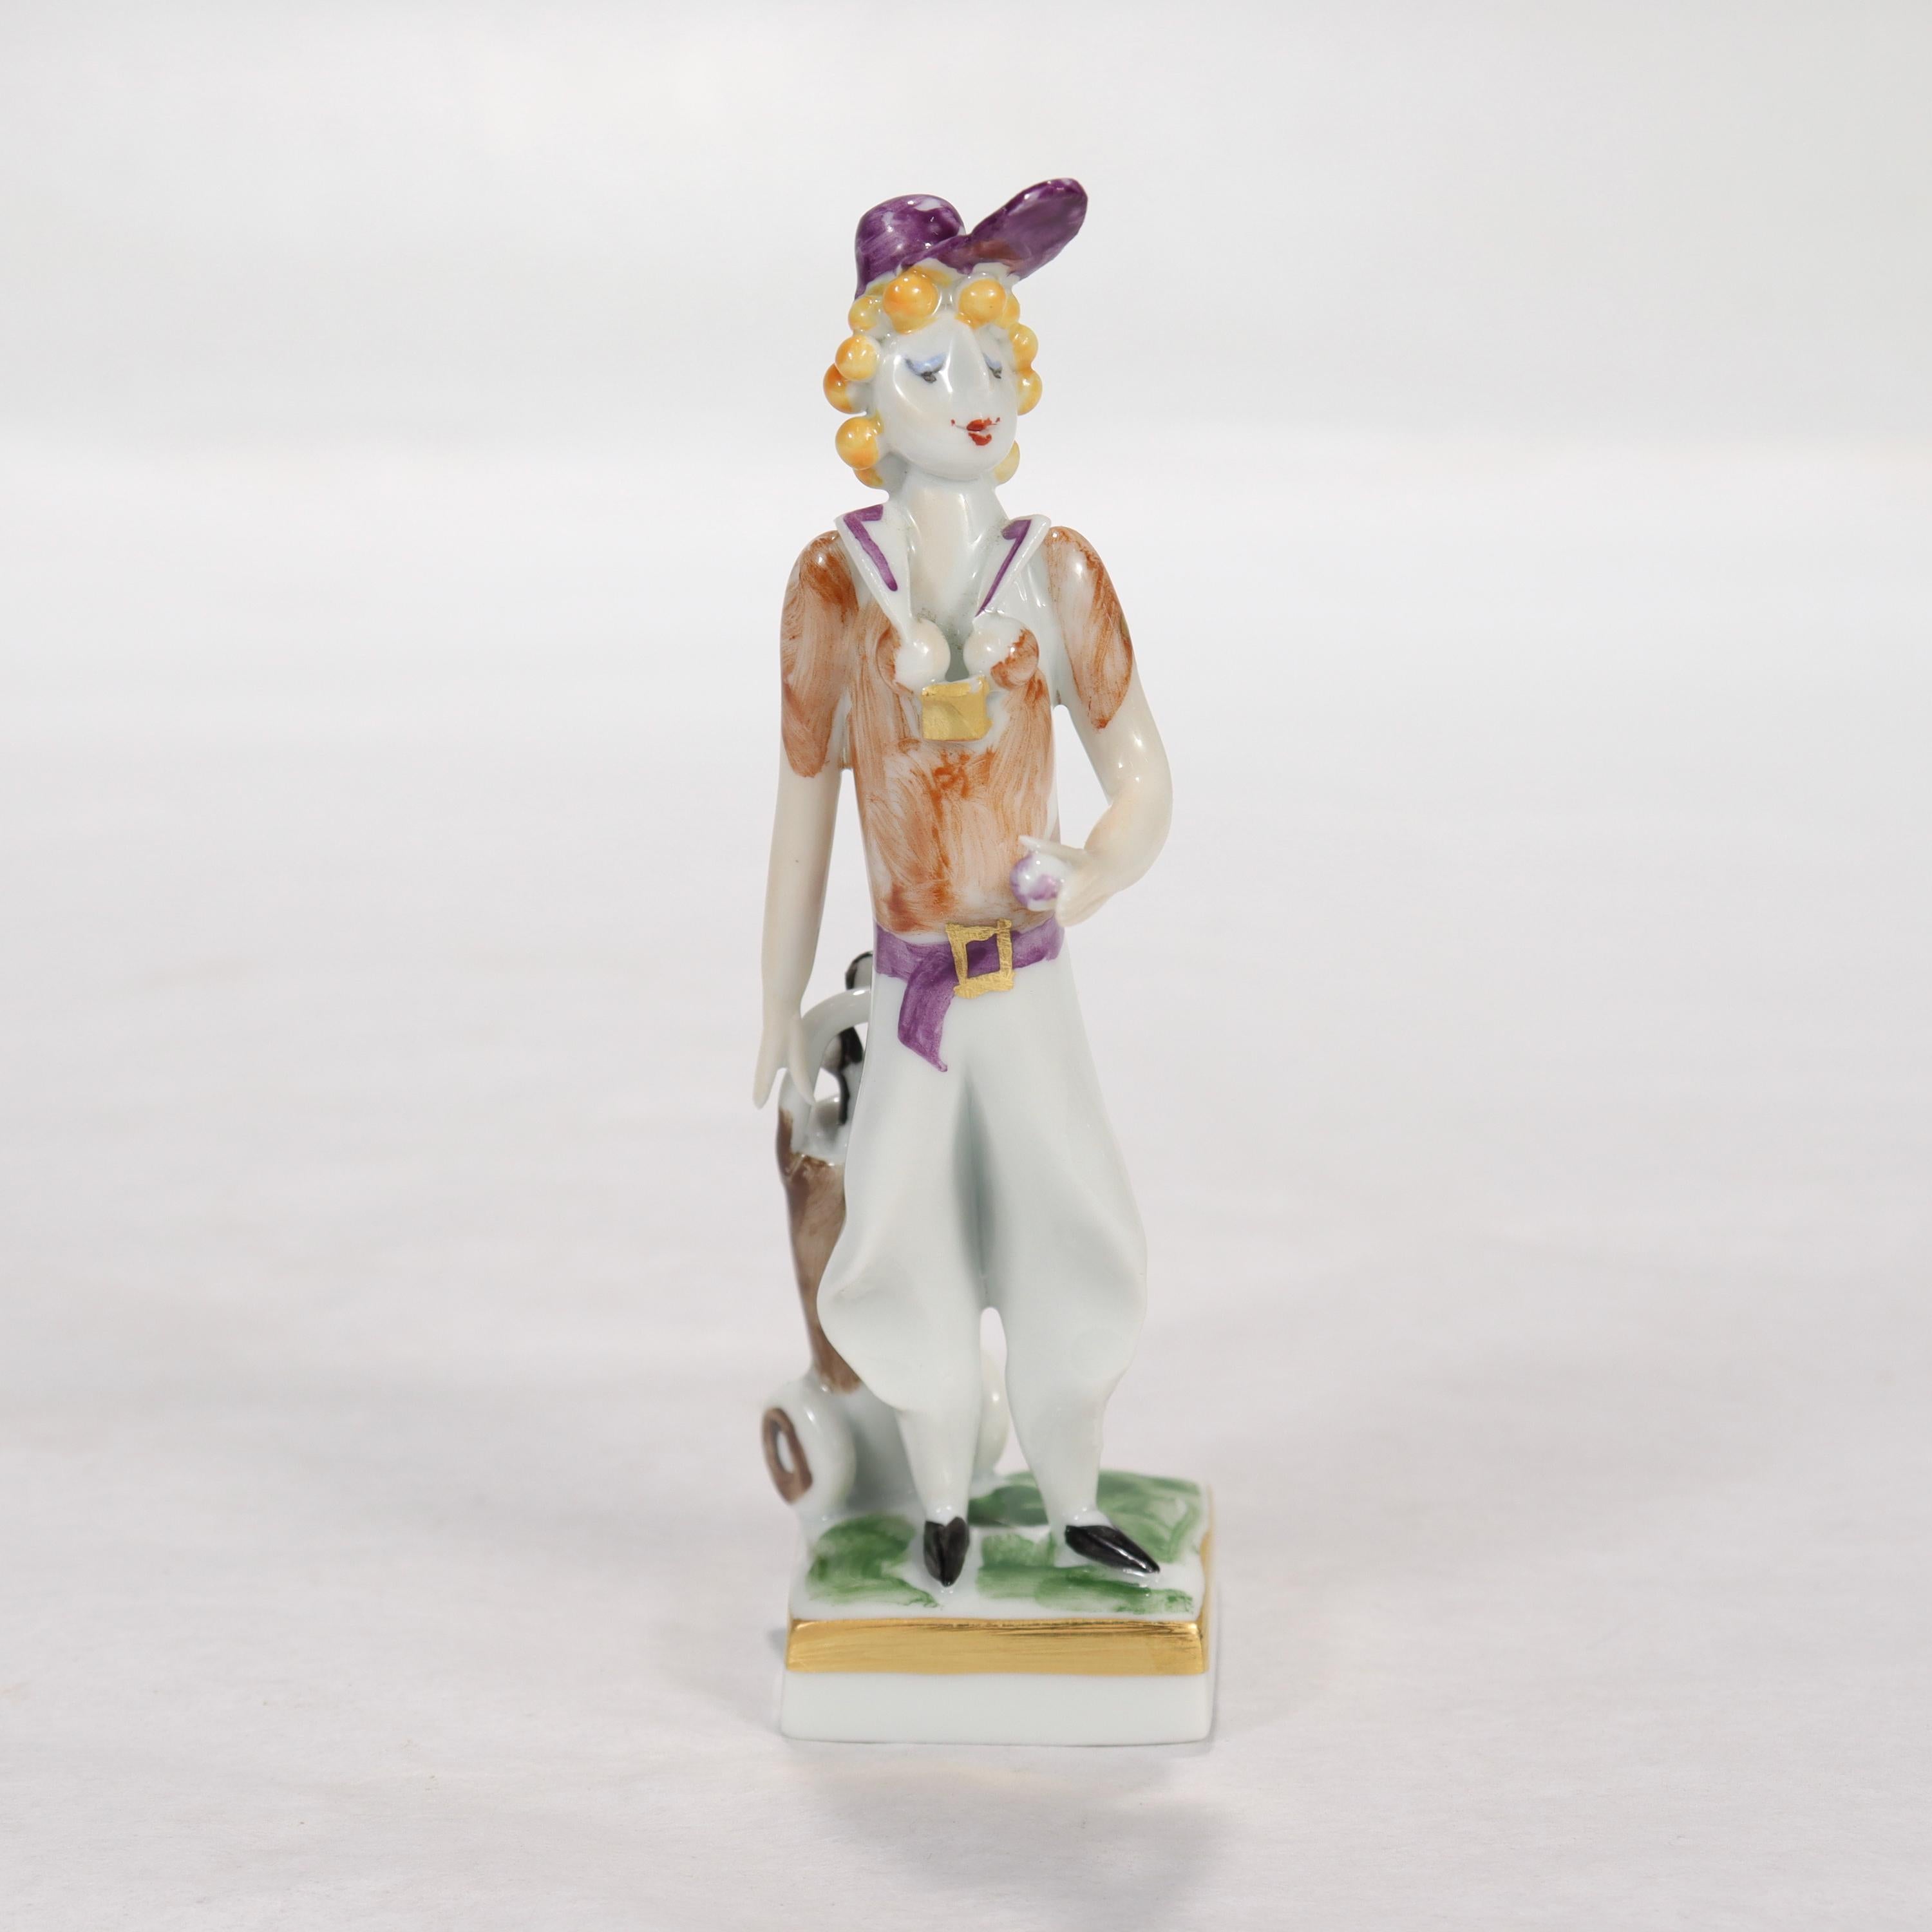 A fine Meissen porcelain figurine or miniature.

By Peter Strang. Strang was born in Dresden in 1935 and received a degree in Sculpture from the Academy of Fine Arts in Dresden in 1960. Peter was a founding member of the Meissen 1960 artists'